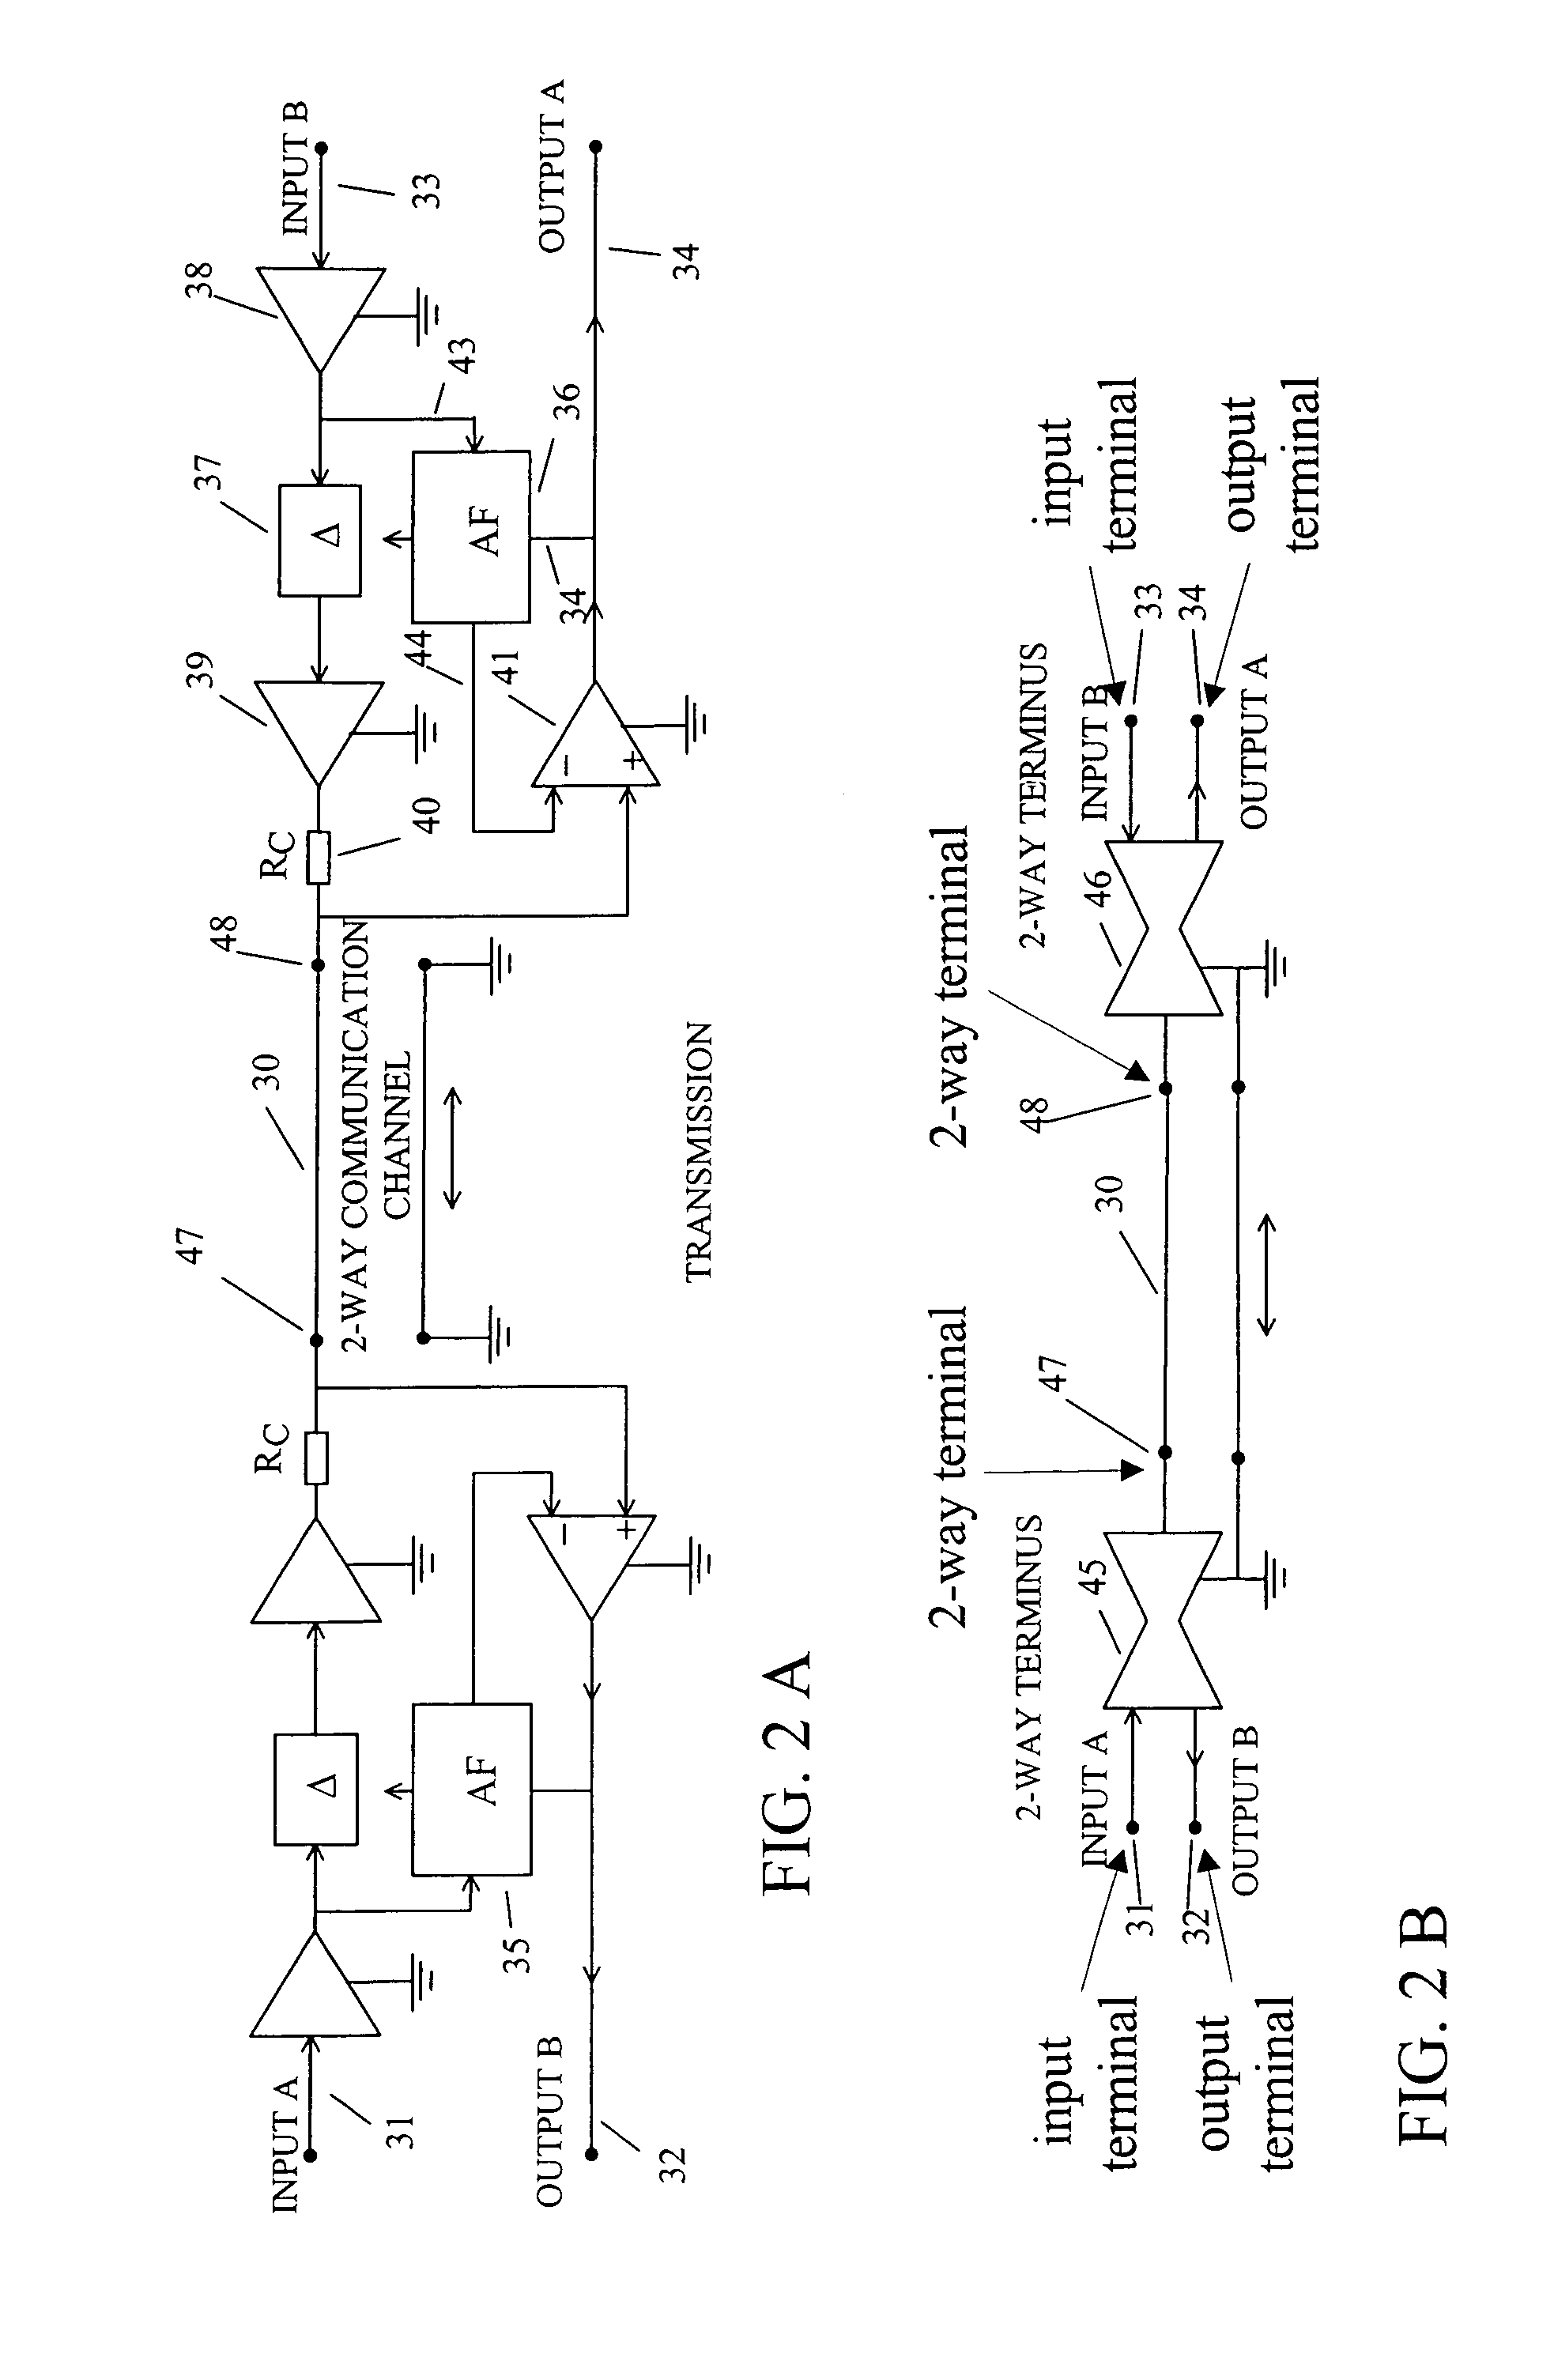 Simultaneous two-way transmission of information signals in the same frequency band